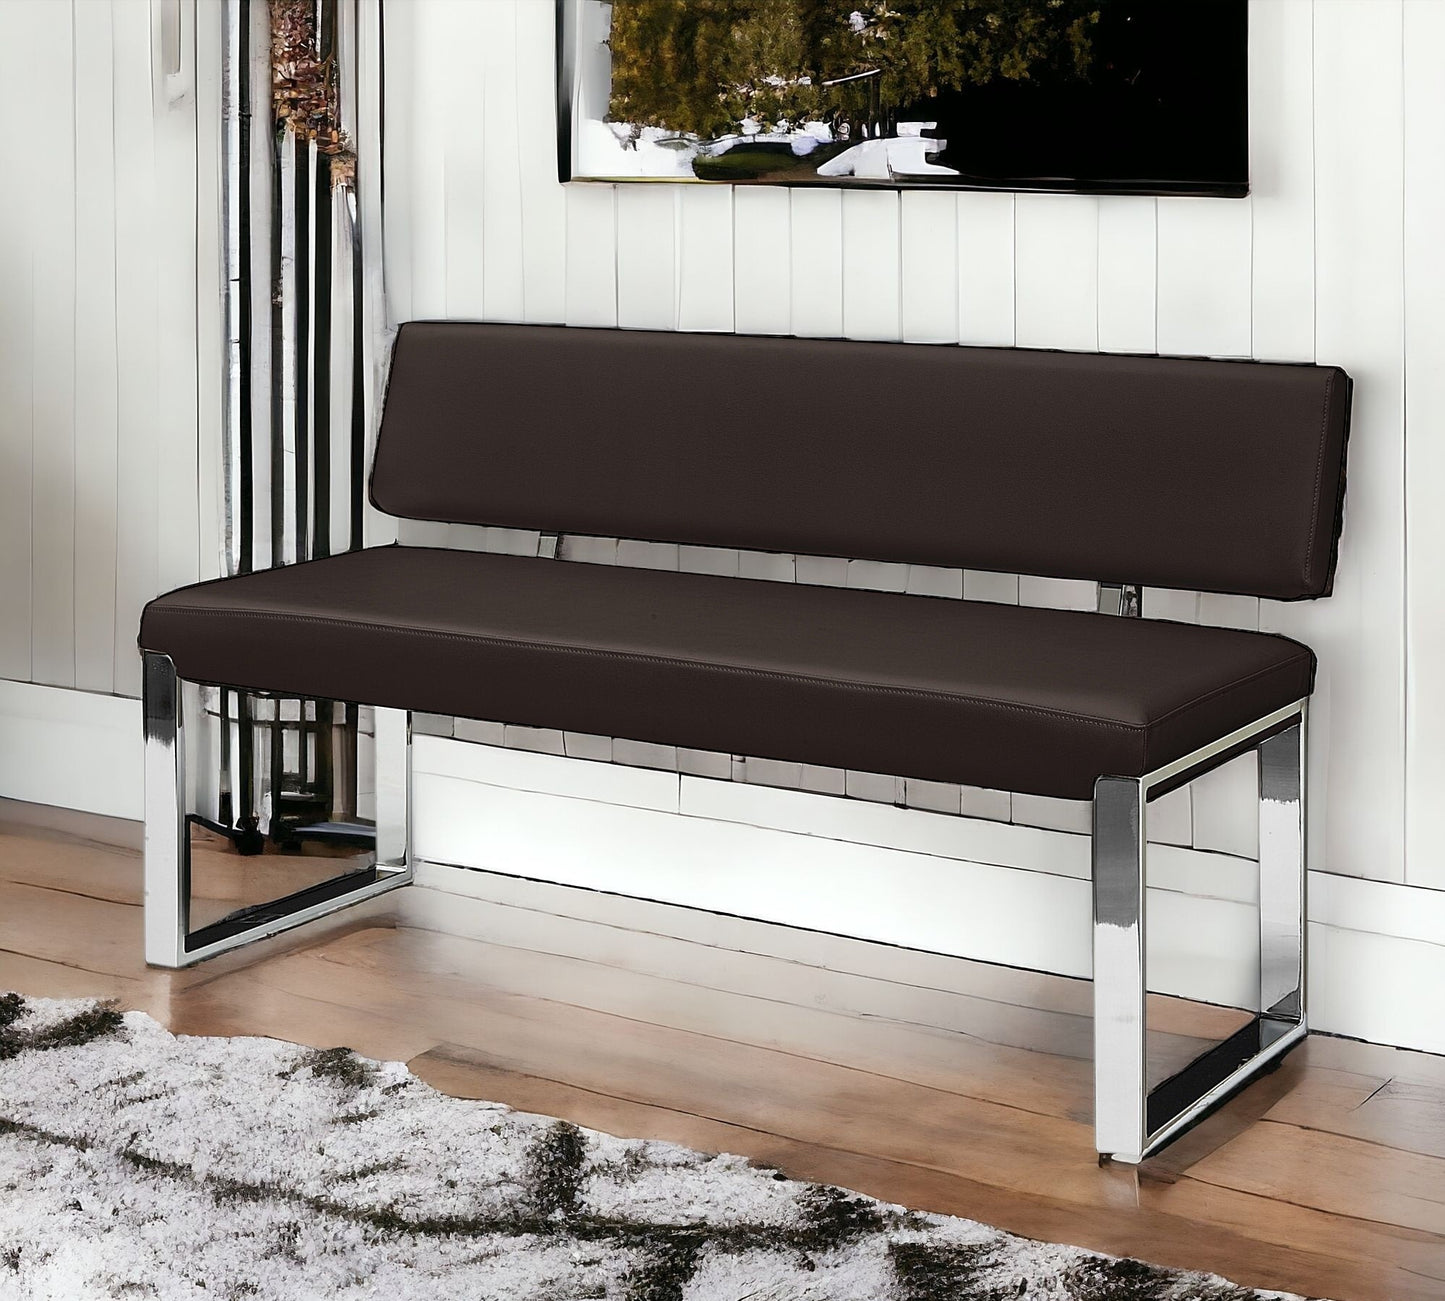 50" Brown and Silver Upholstered Faux Leather Bench